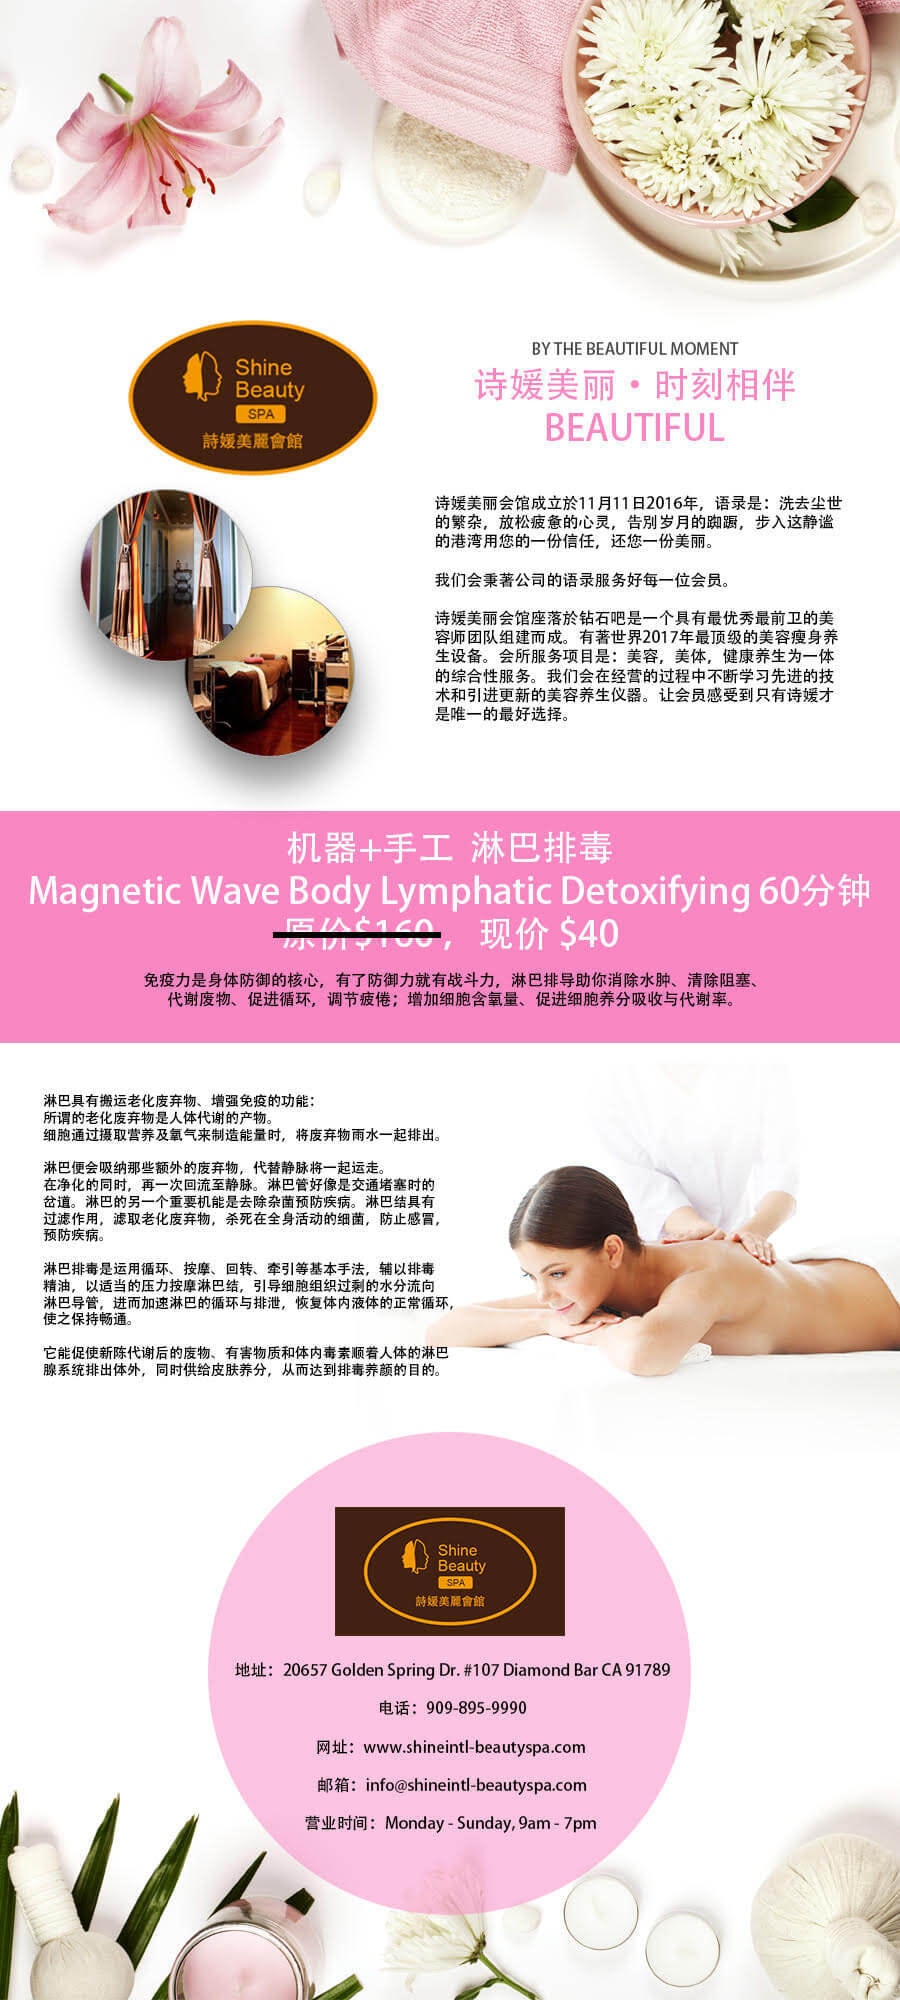 RF body Magnetic Wave Lymphatic Detoxifying Try it for $40